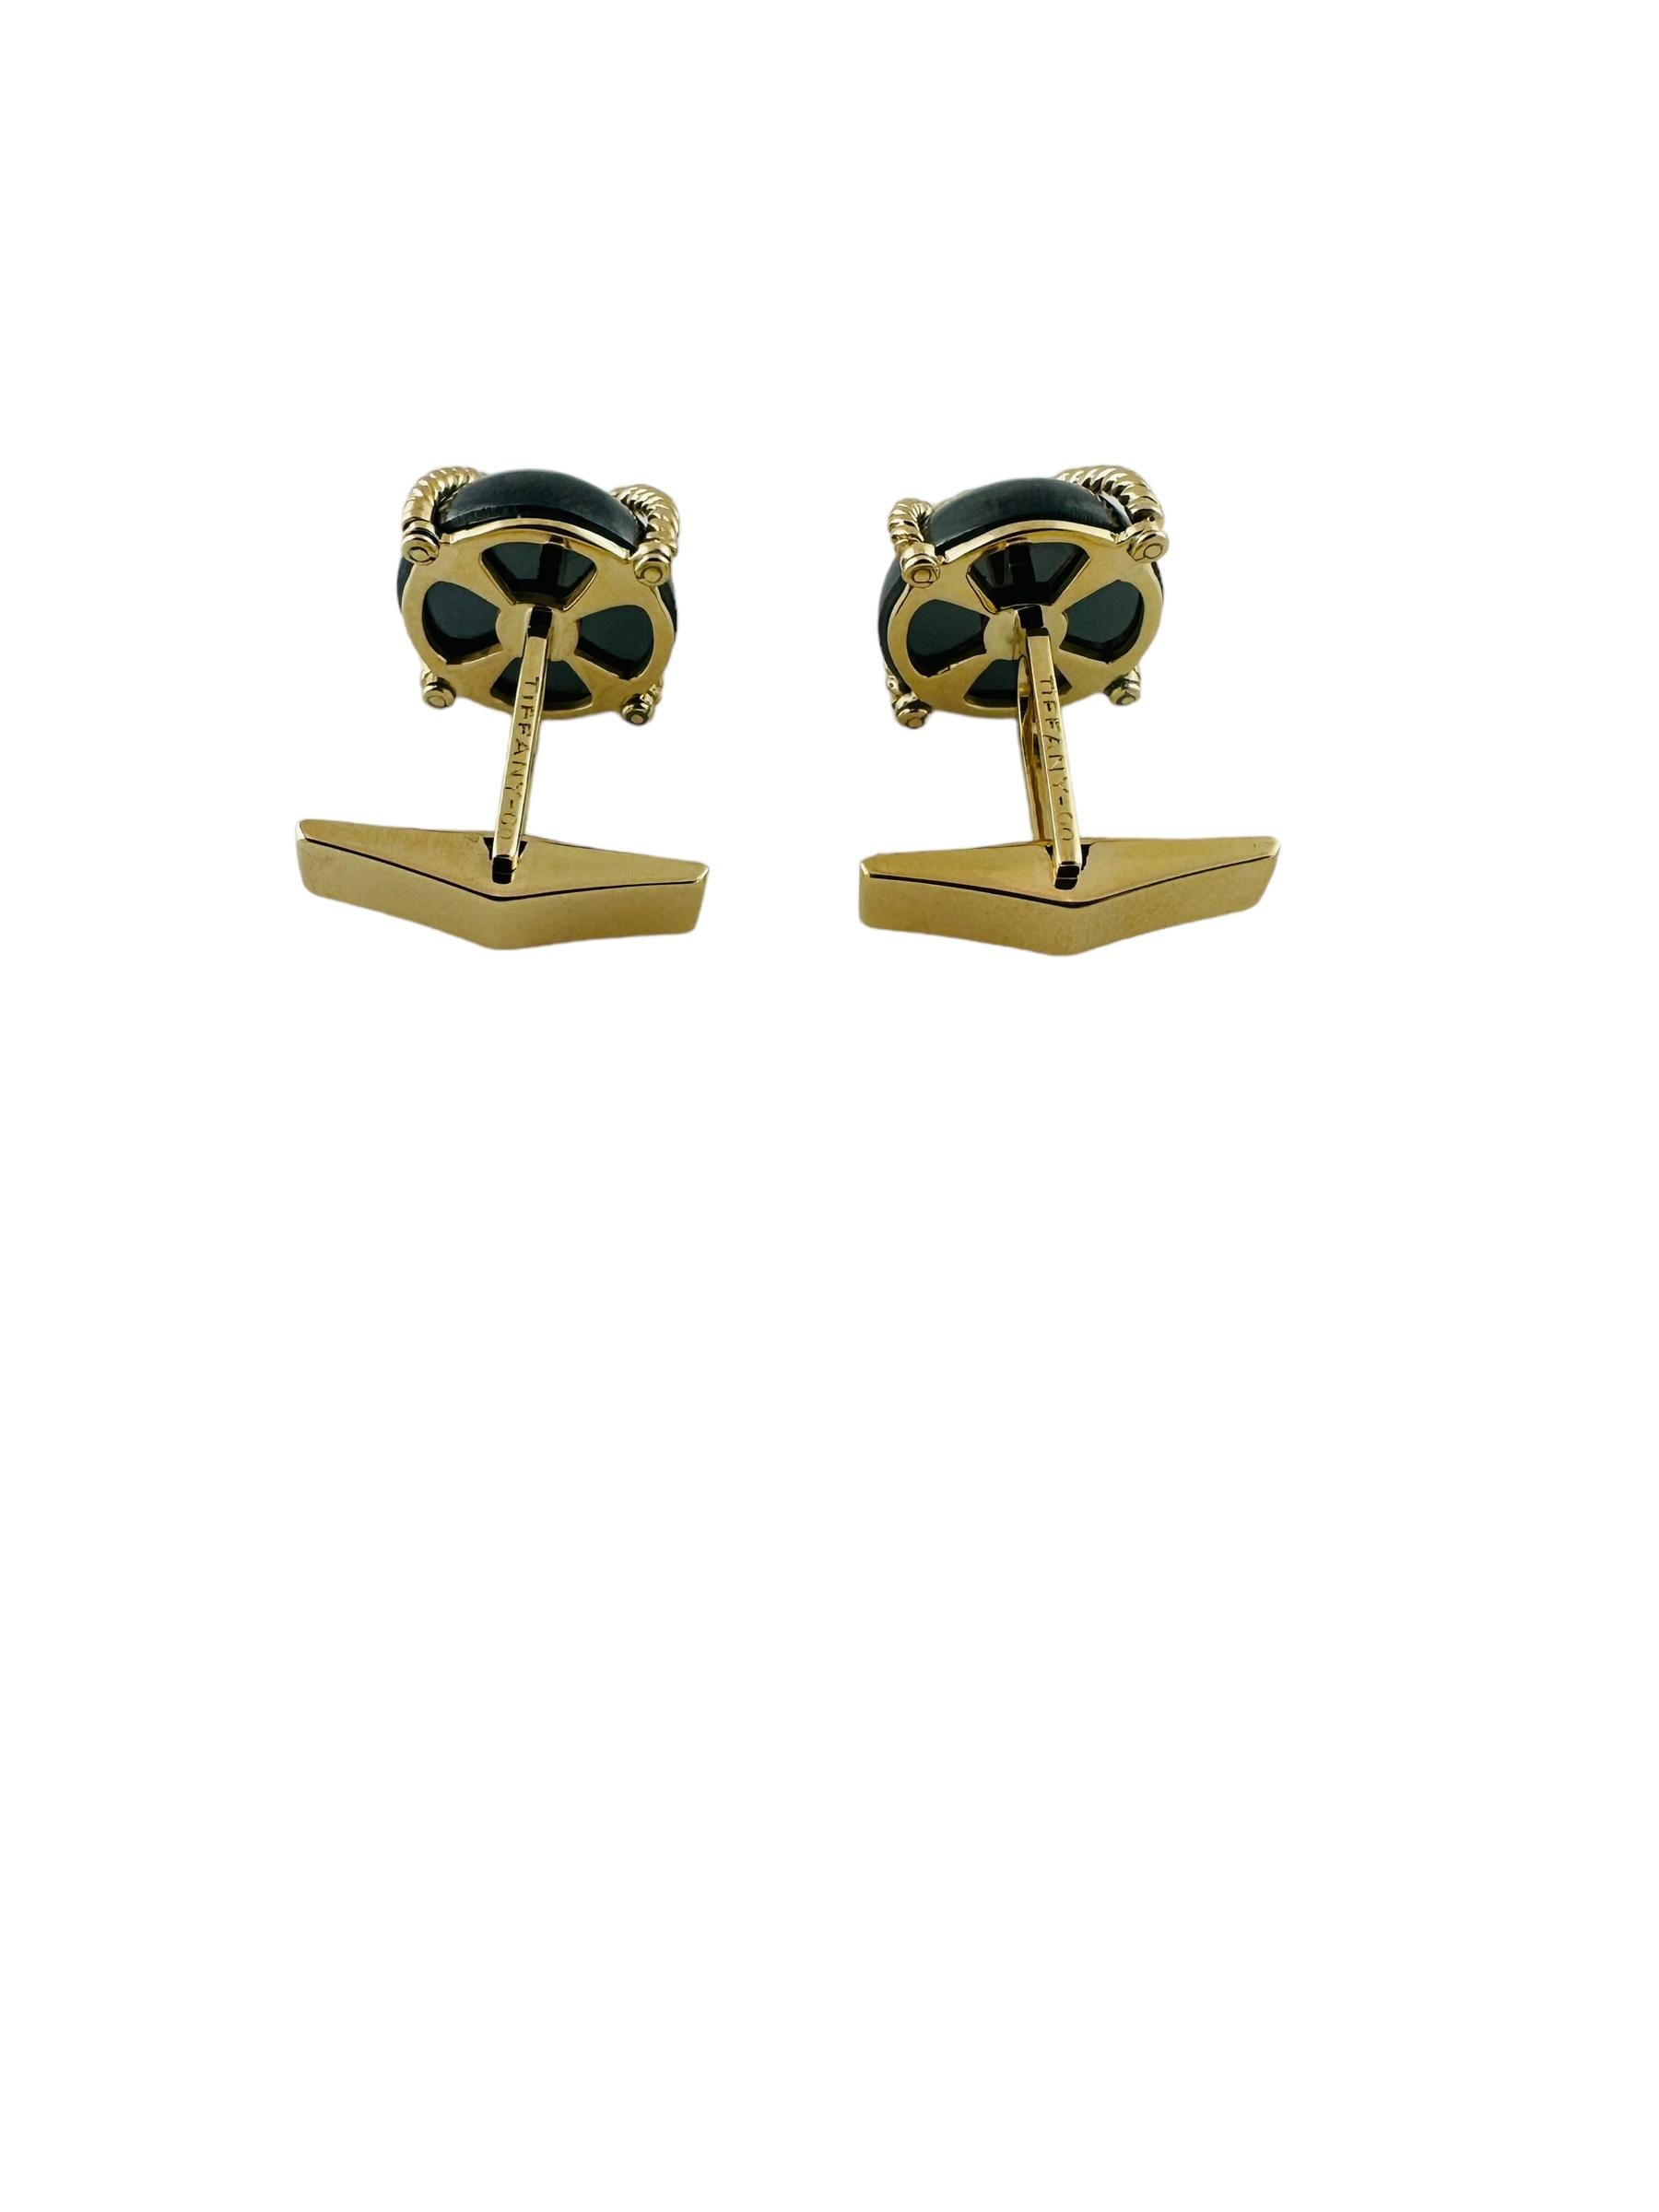 Vintage Tiffany & Co. 14K Yellow Gold Hematite Cable Cufflinks In Good Condition For Sale In Washington Depot, CT